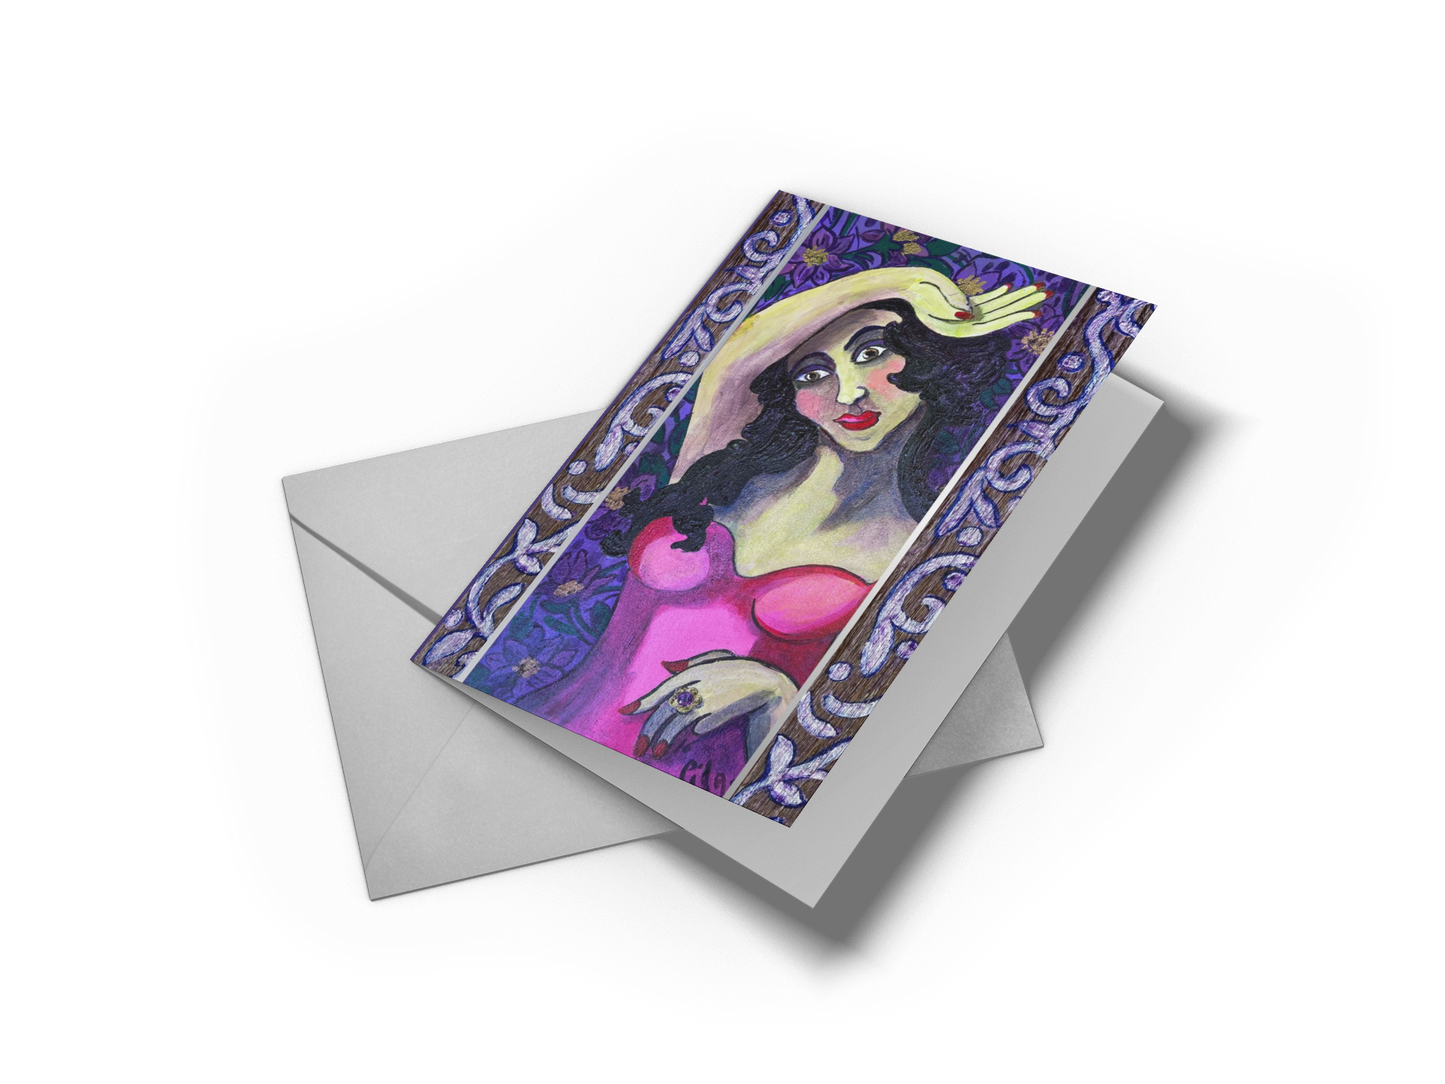 Greeting Card - "Violetta" From "Les Parisiennes" Series